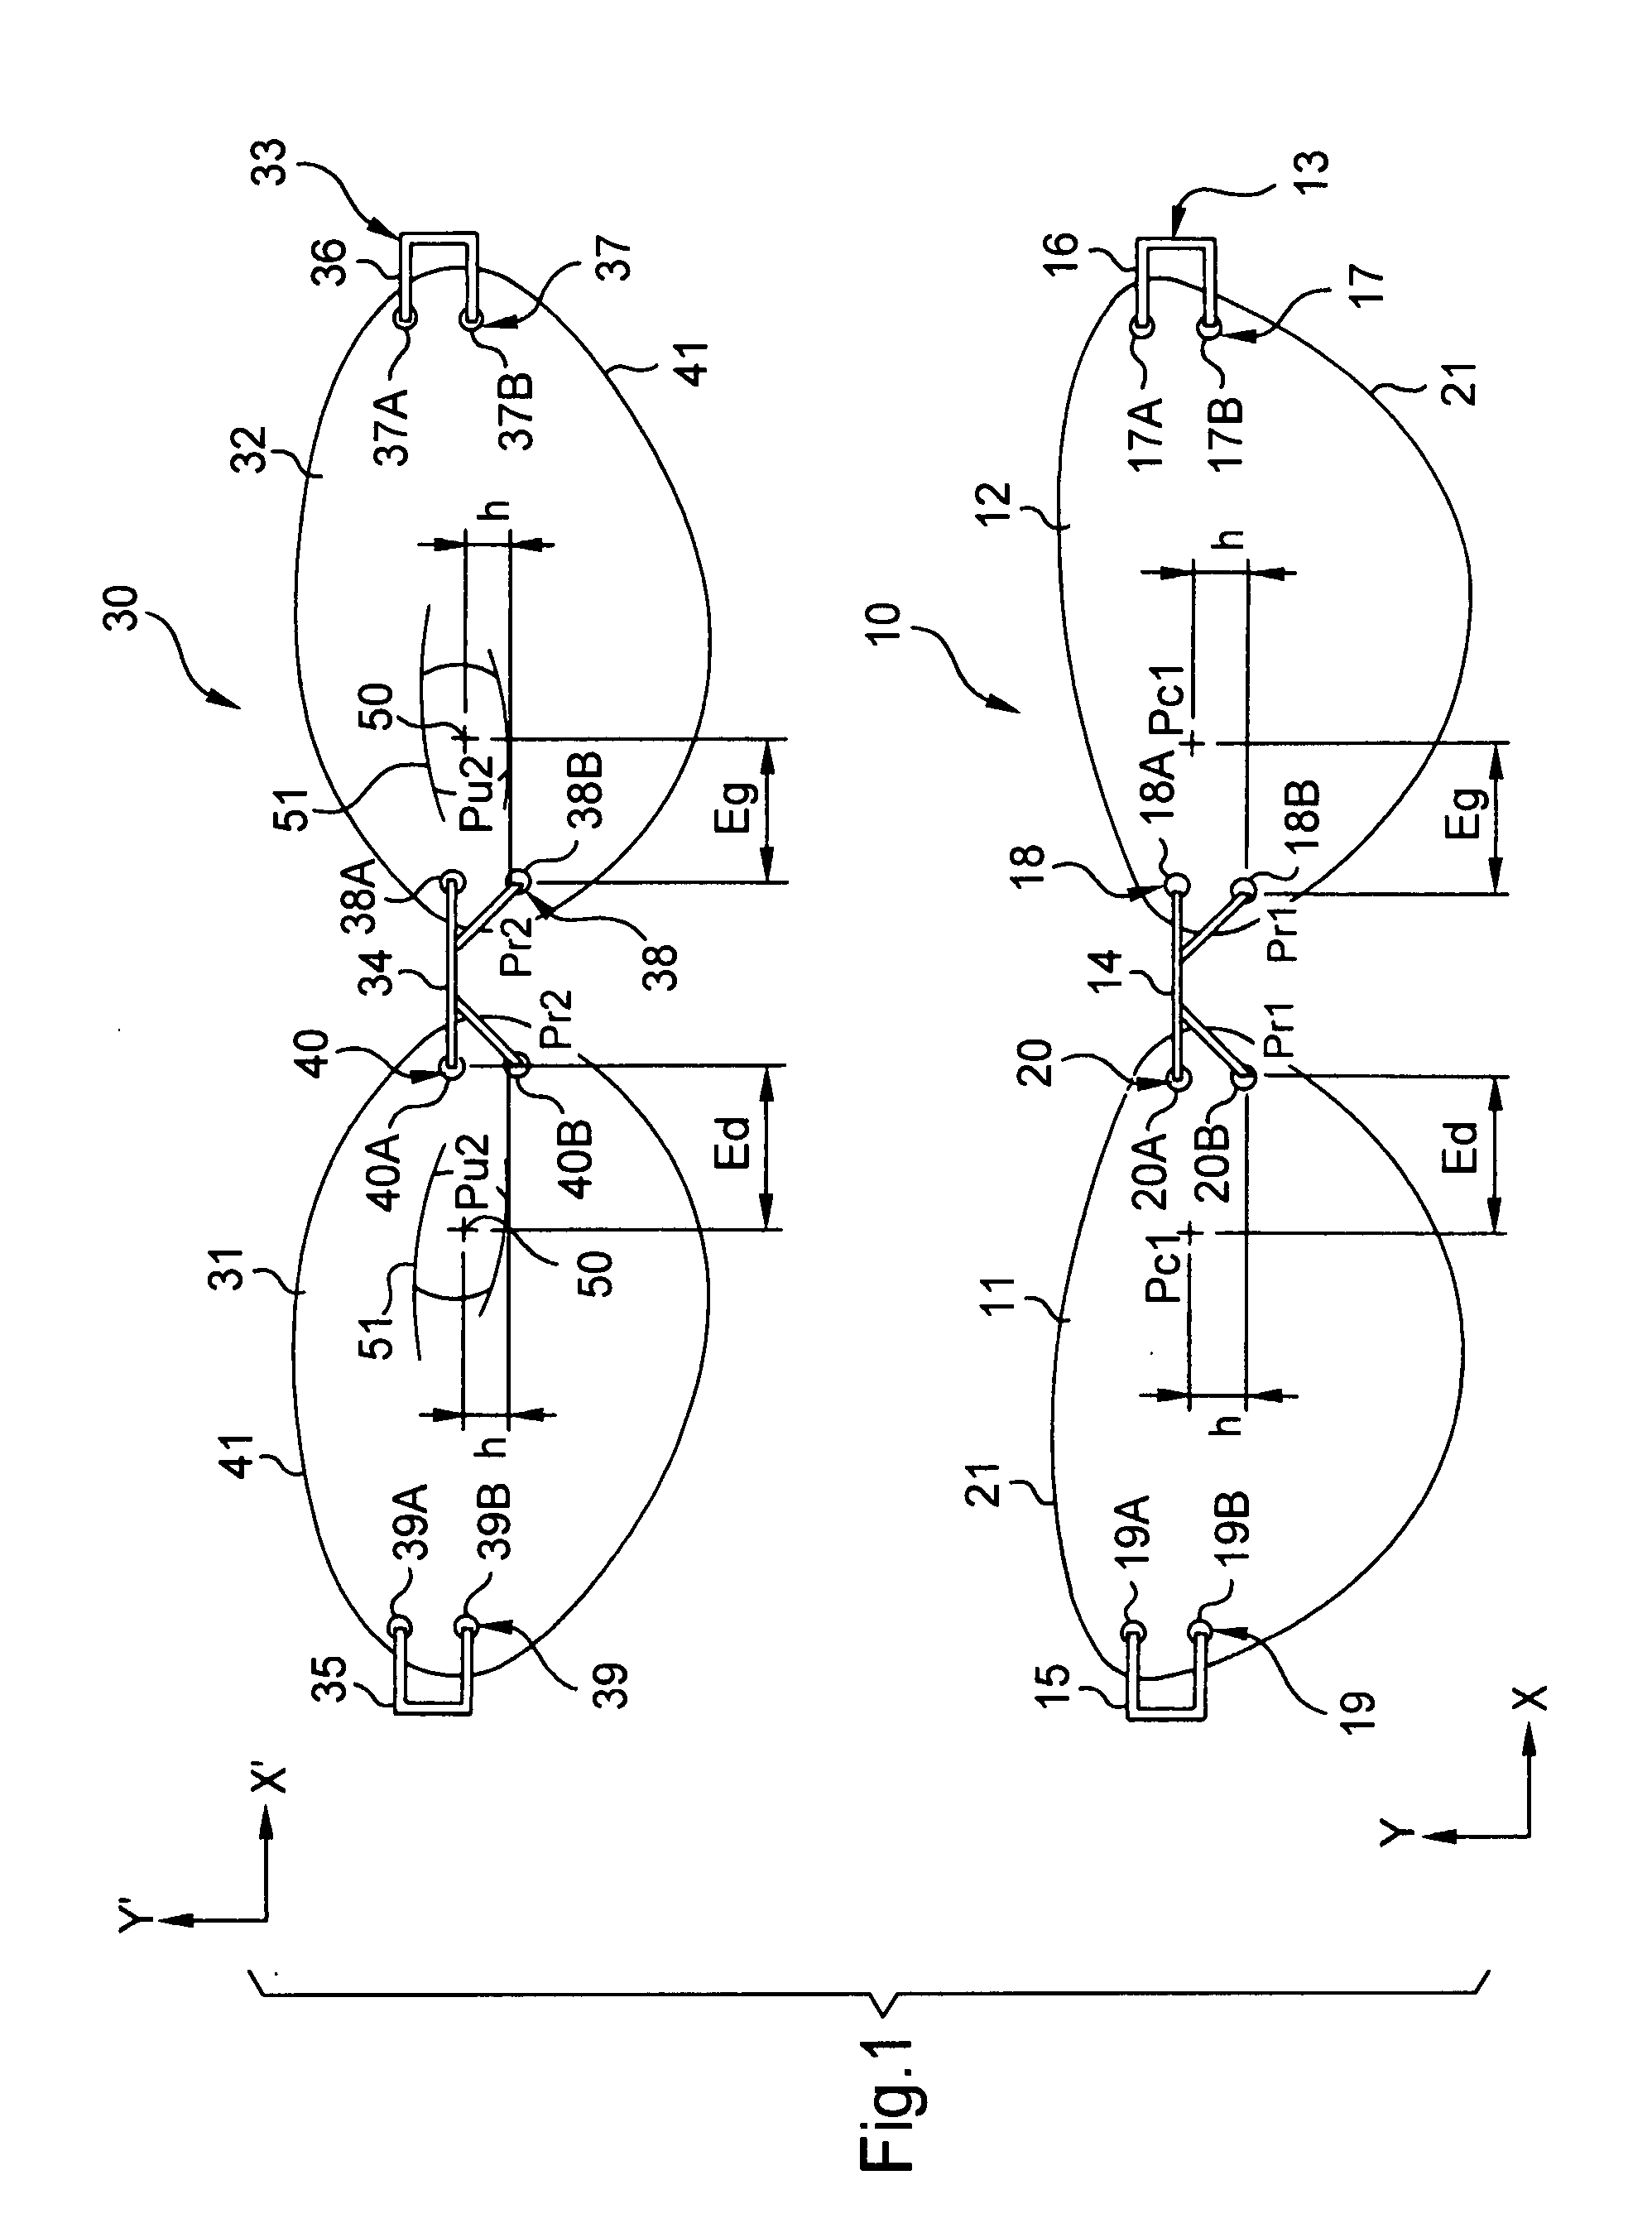 Method of Centering an Ophthalmic Lens on a Rimless Frame